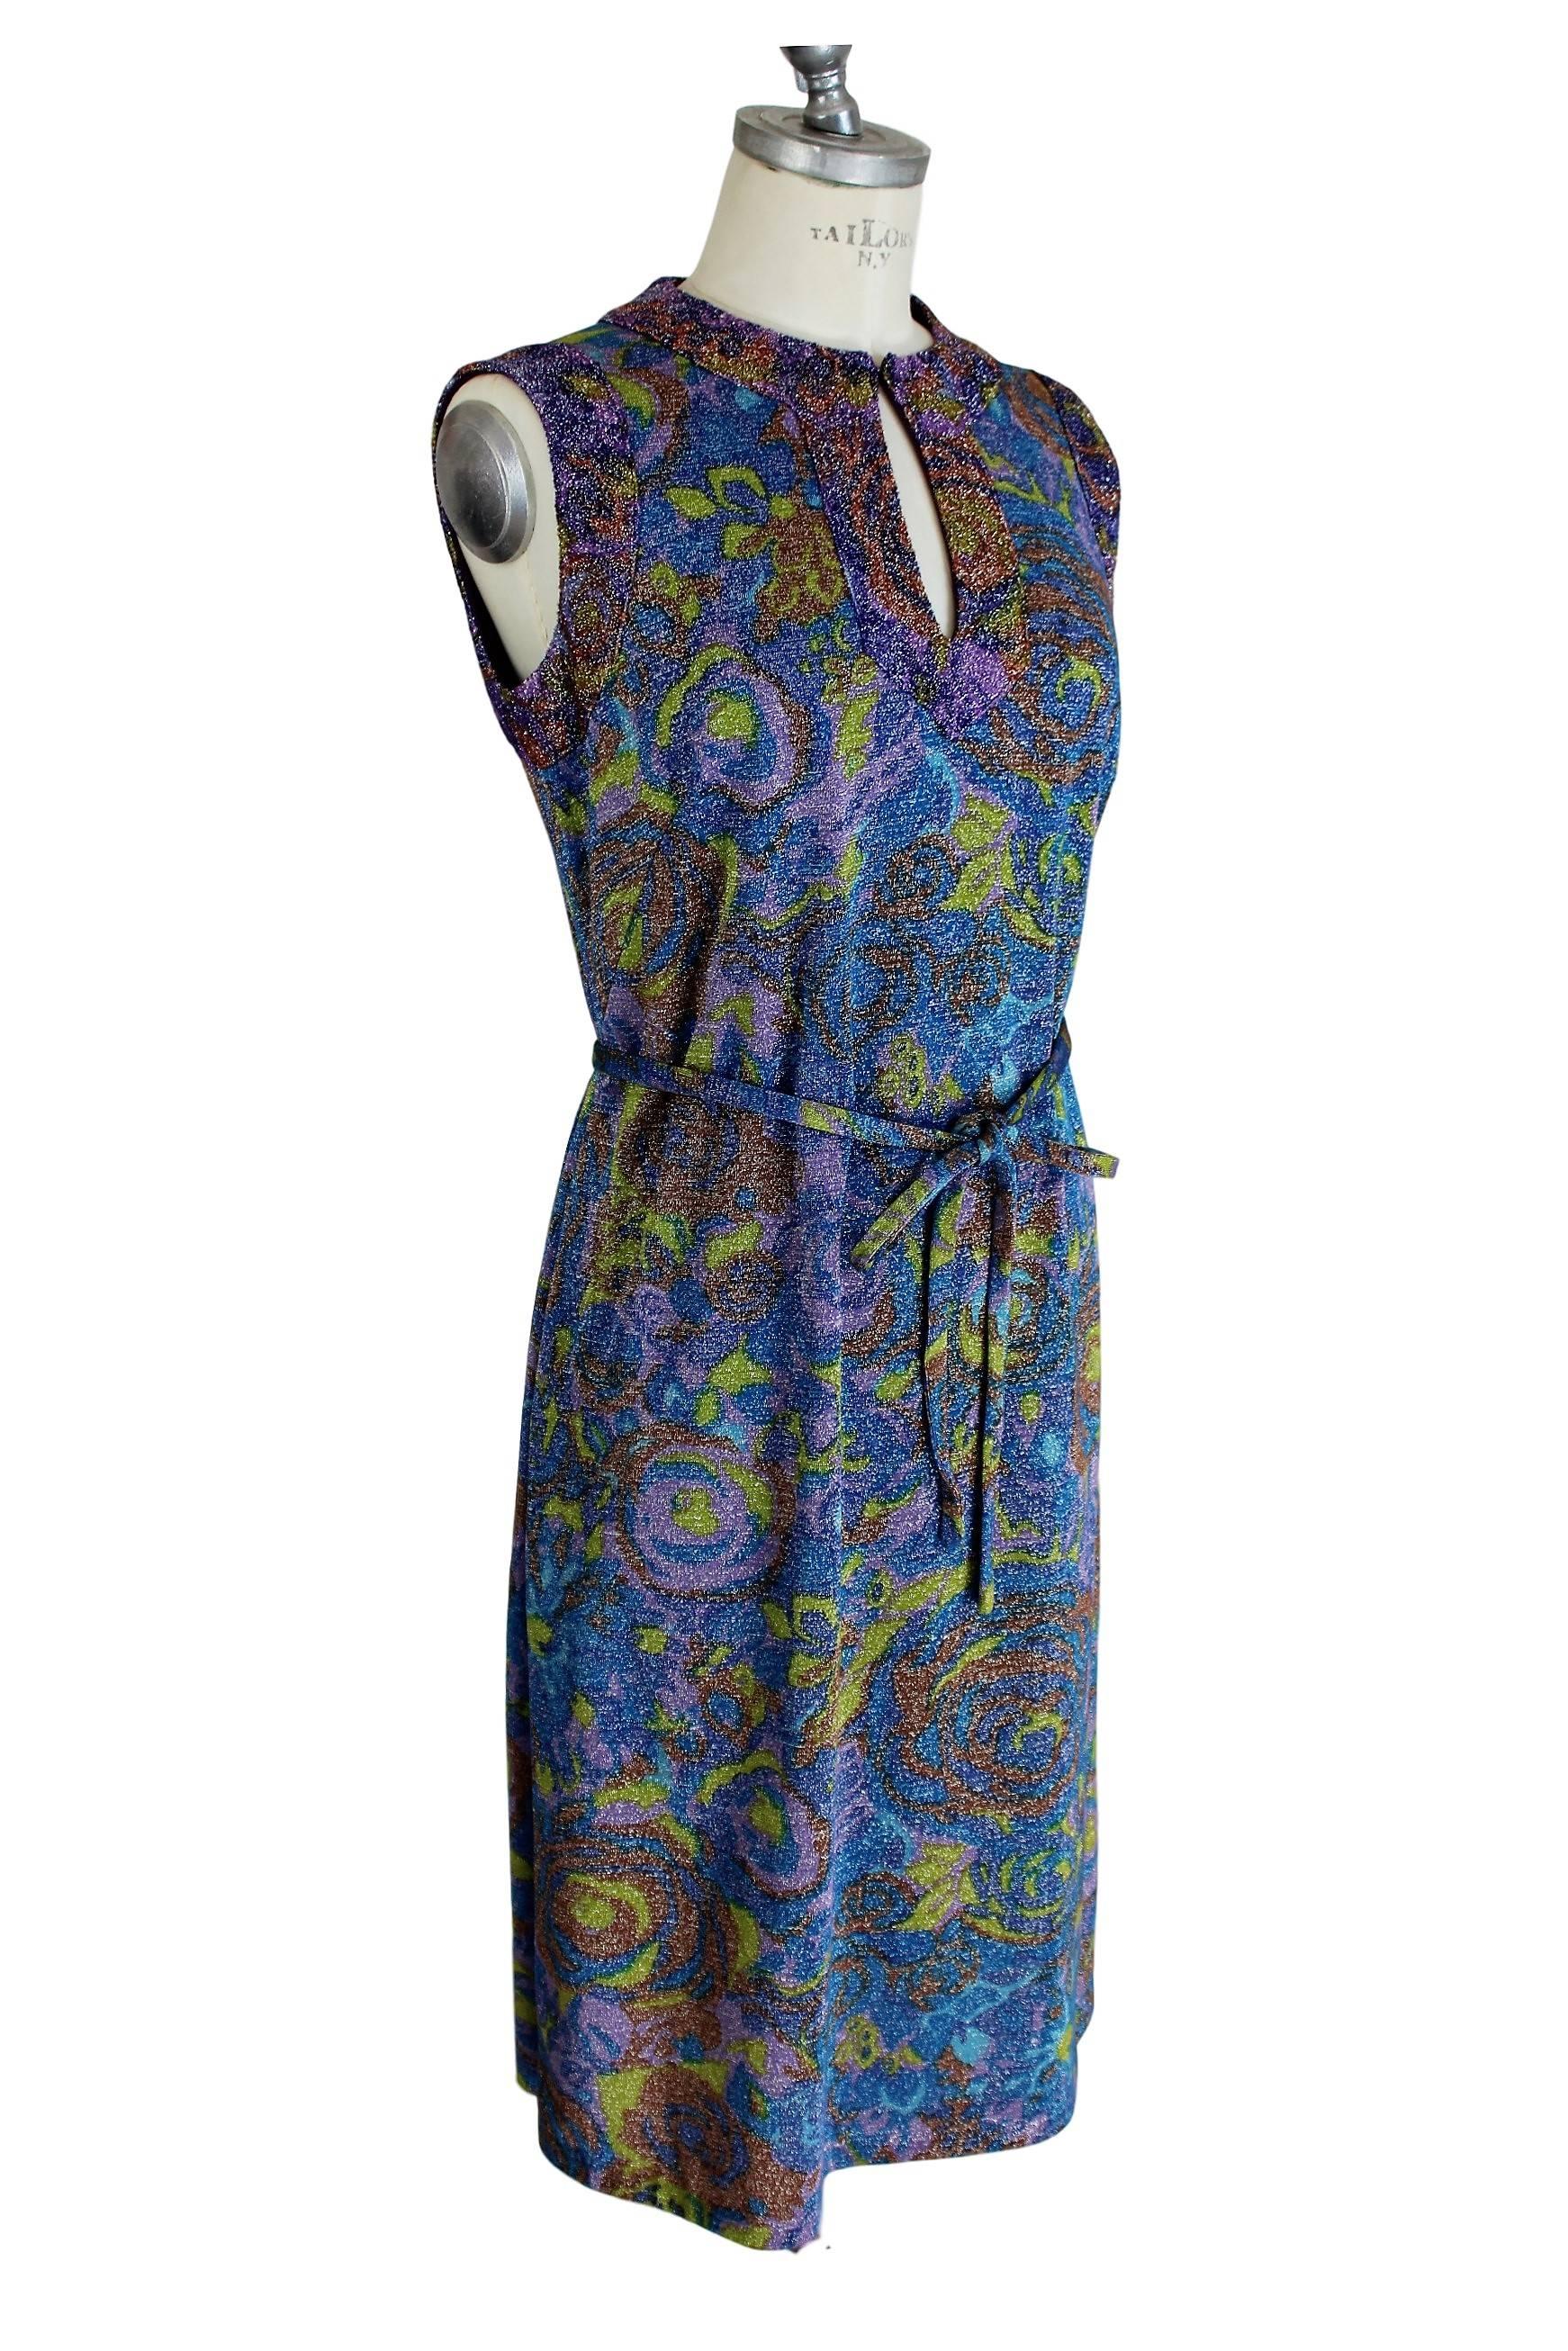 Rare tailored Sorelle Fontana Vintage 1960s dress gleaming metallic blue, floral motif. Neck closed by a flap open button on the chest. Belted waist.

Size: 42 (IT) / 36 (NL/DE) 

Measures: 

Shoulders: 42 cm 
Armpit to armpit: 48 cm 
Sleeves: no